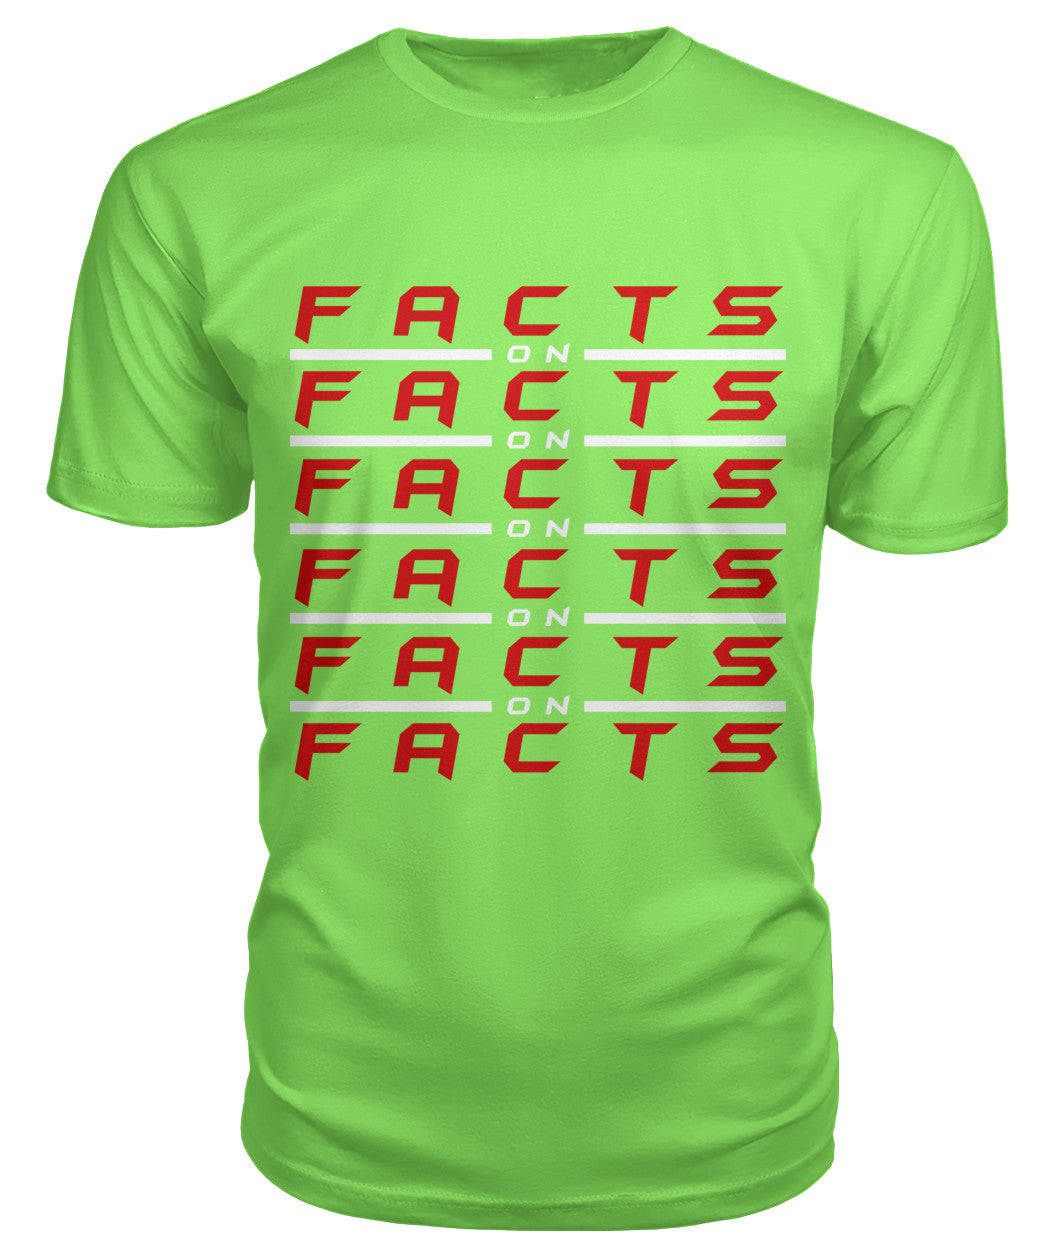 Facts on Facts (T-Shirts)